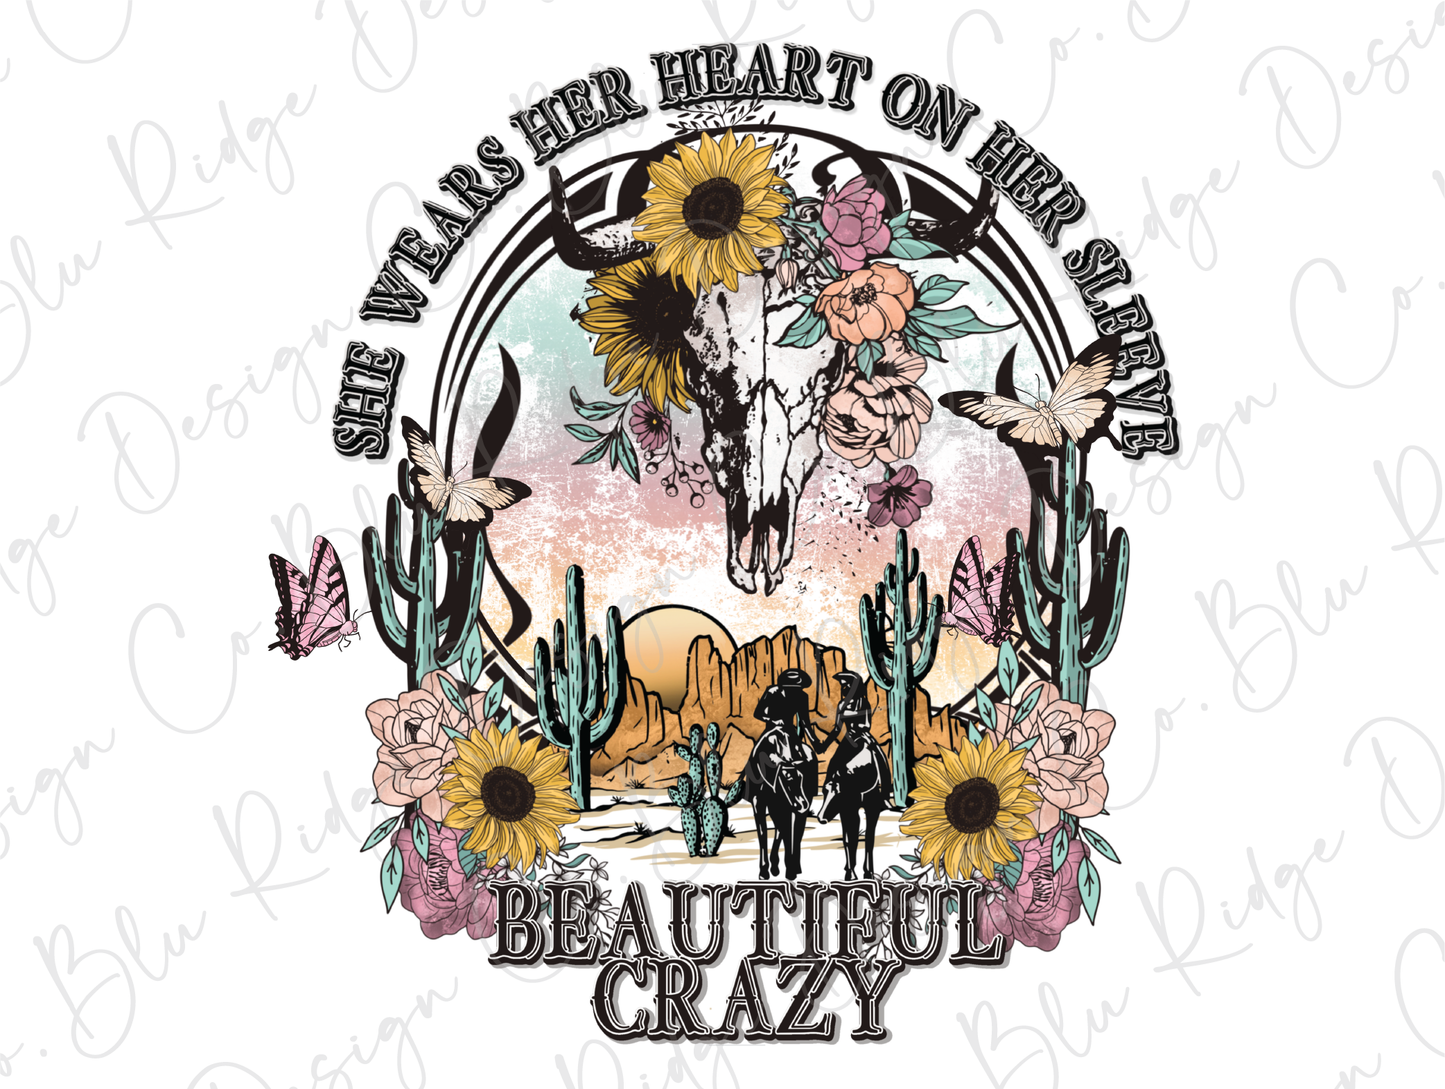 She Wears Her Heart On Her Sleeve Beautiful Crazy Country Music Direct To Film (DTF) Transfer